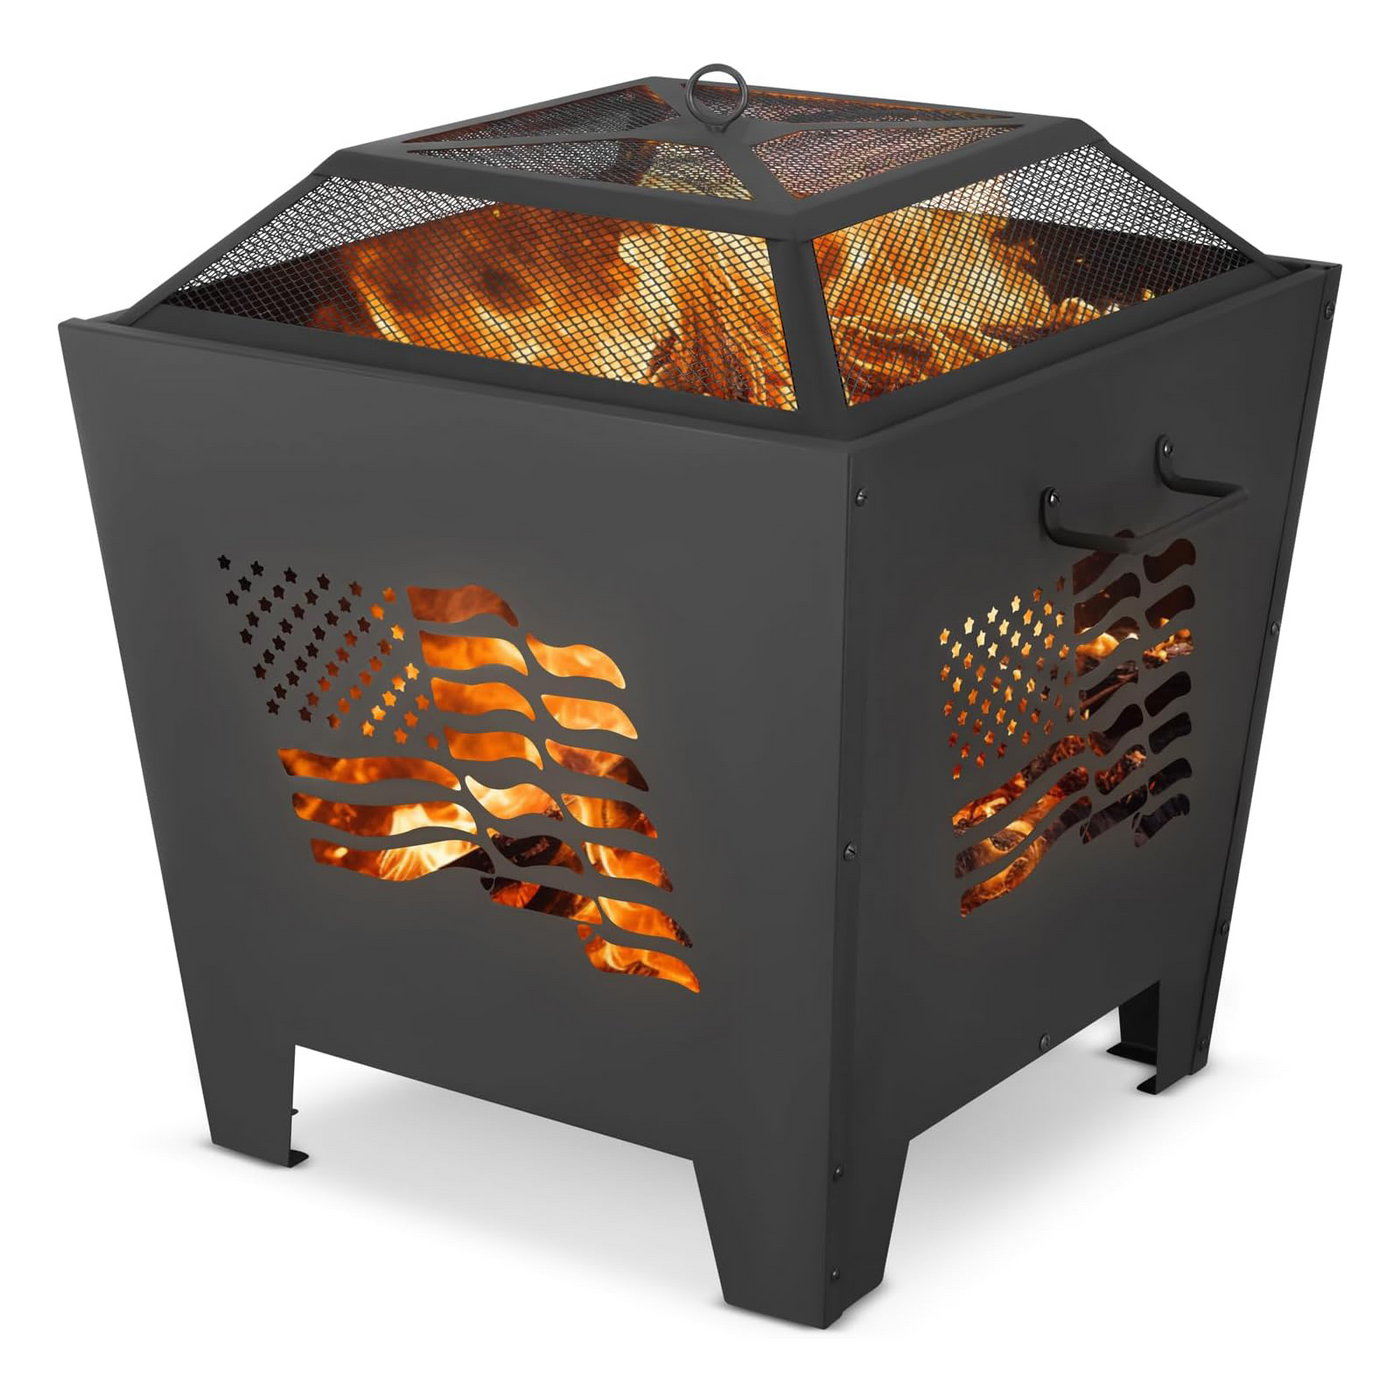 Garnetics Fire Pit Portable Wood Grill for Outdoors